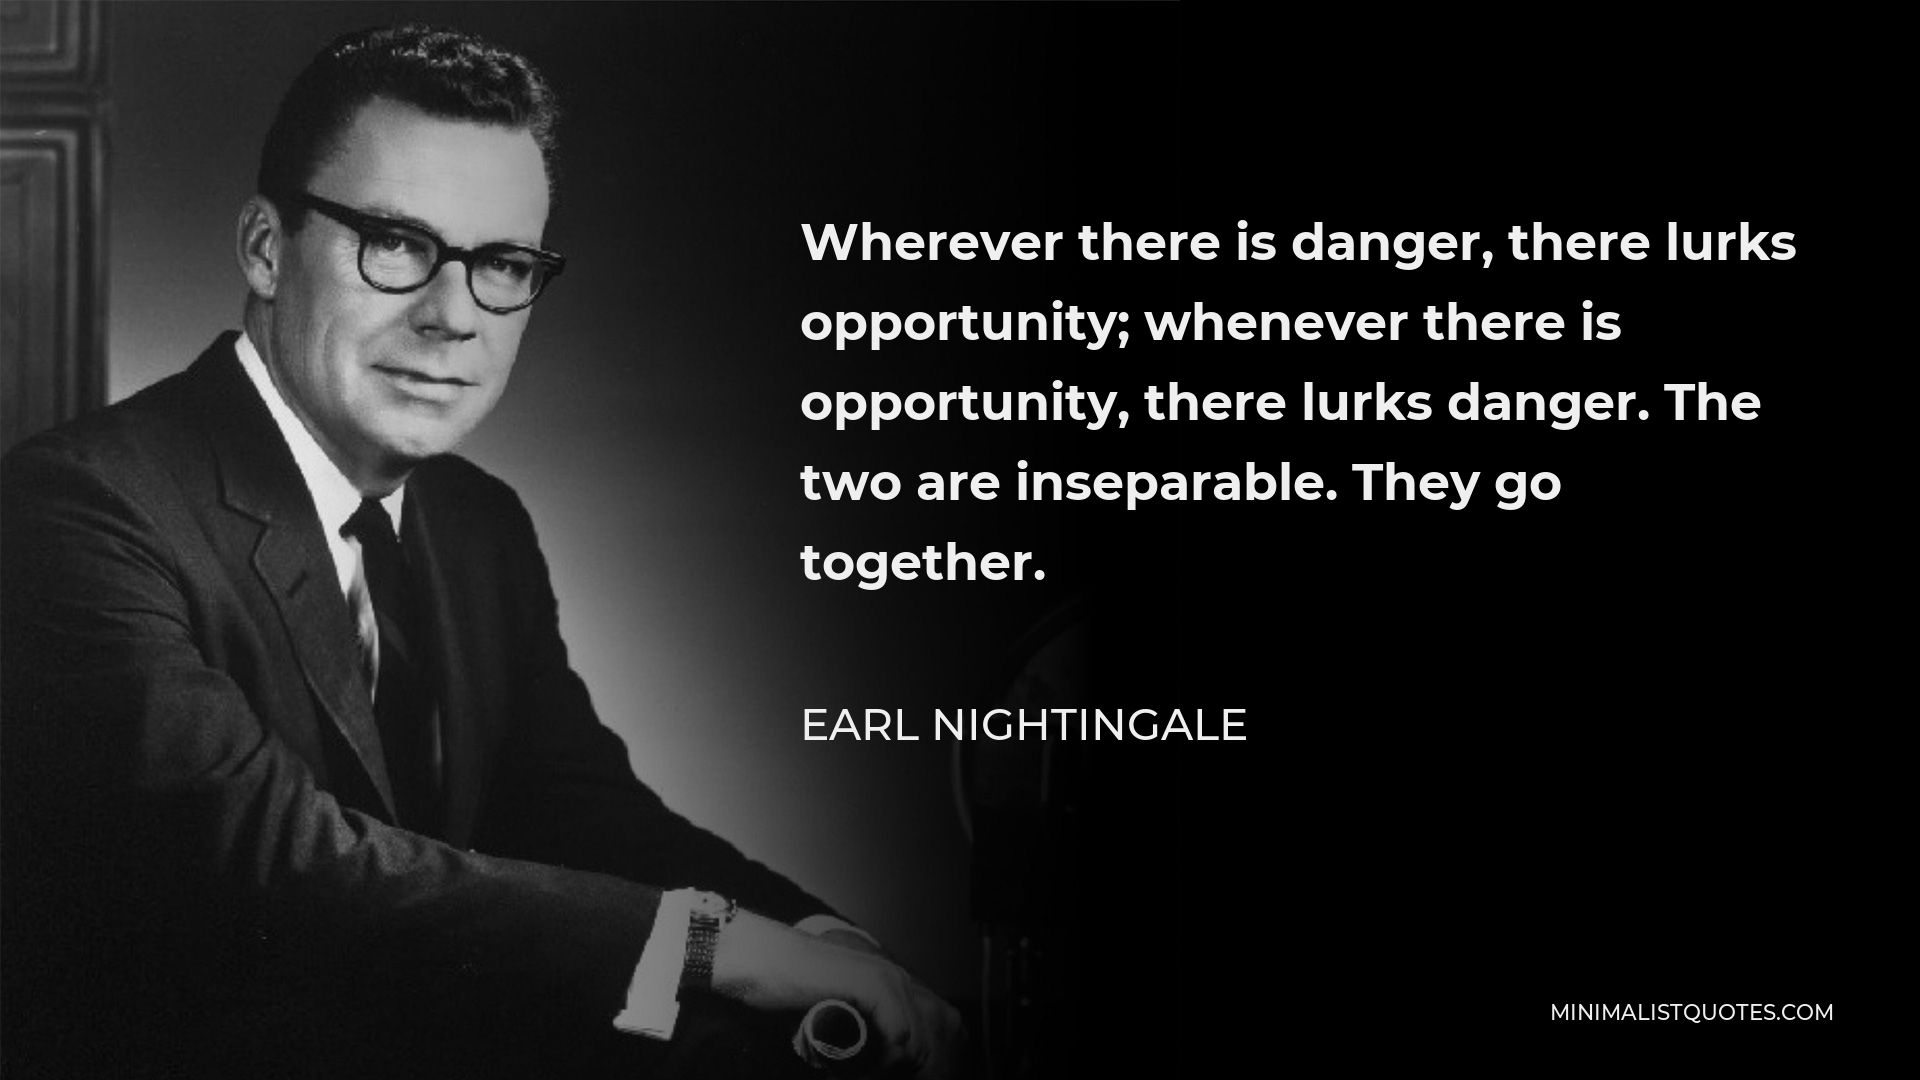 Earl Nightingale Quote - Wherever there is danger, there lurks opportunity; whenever there is opportunity, there lurks danger. The two are inseparable. They go together.